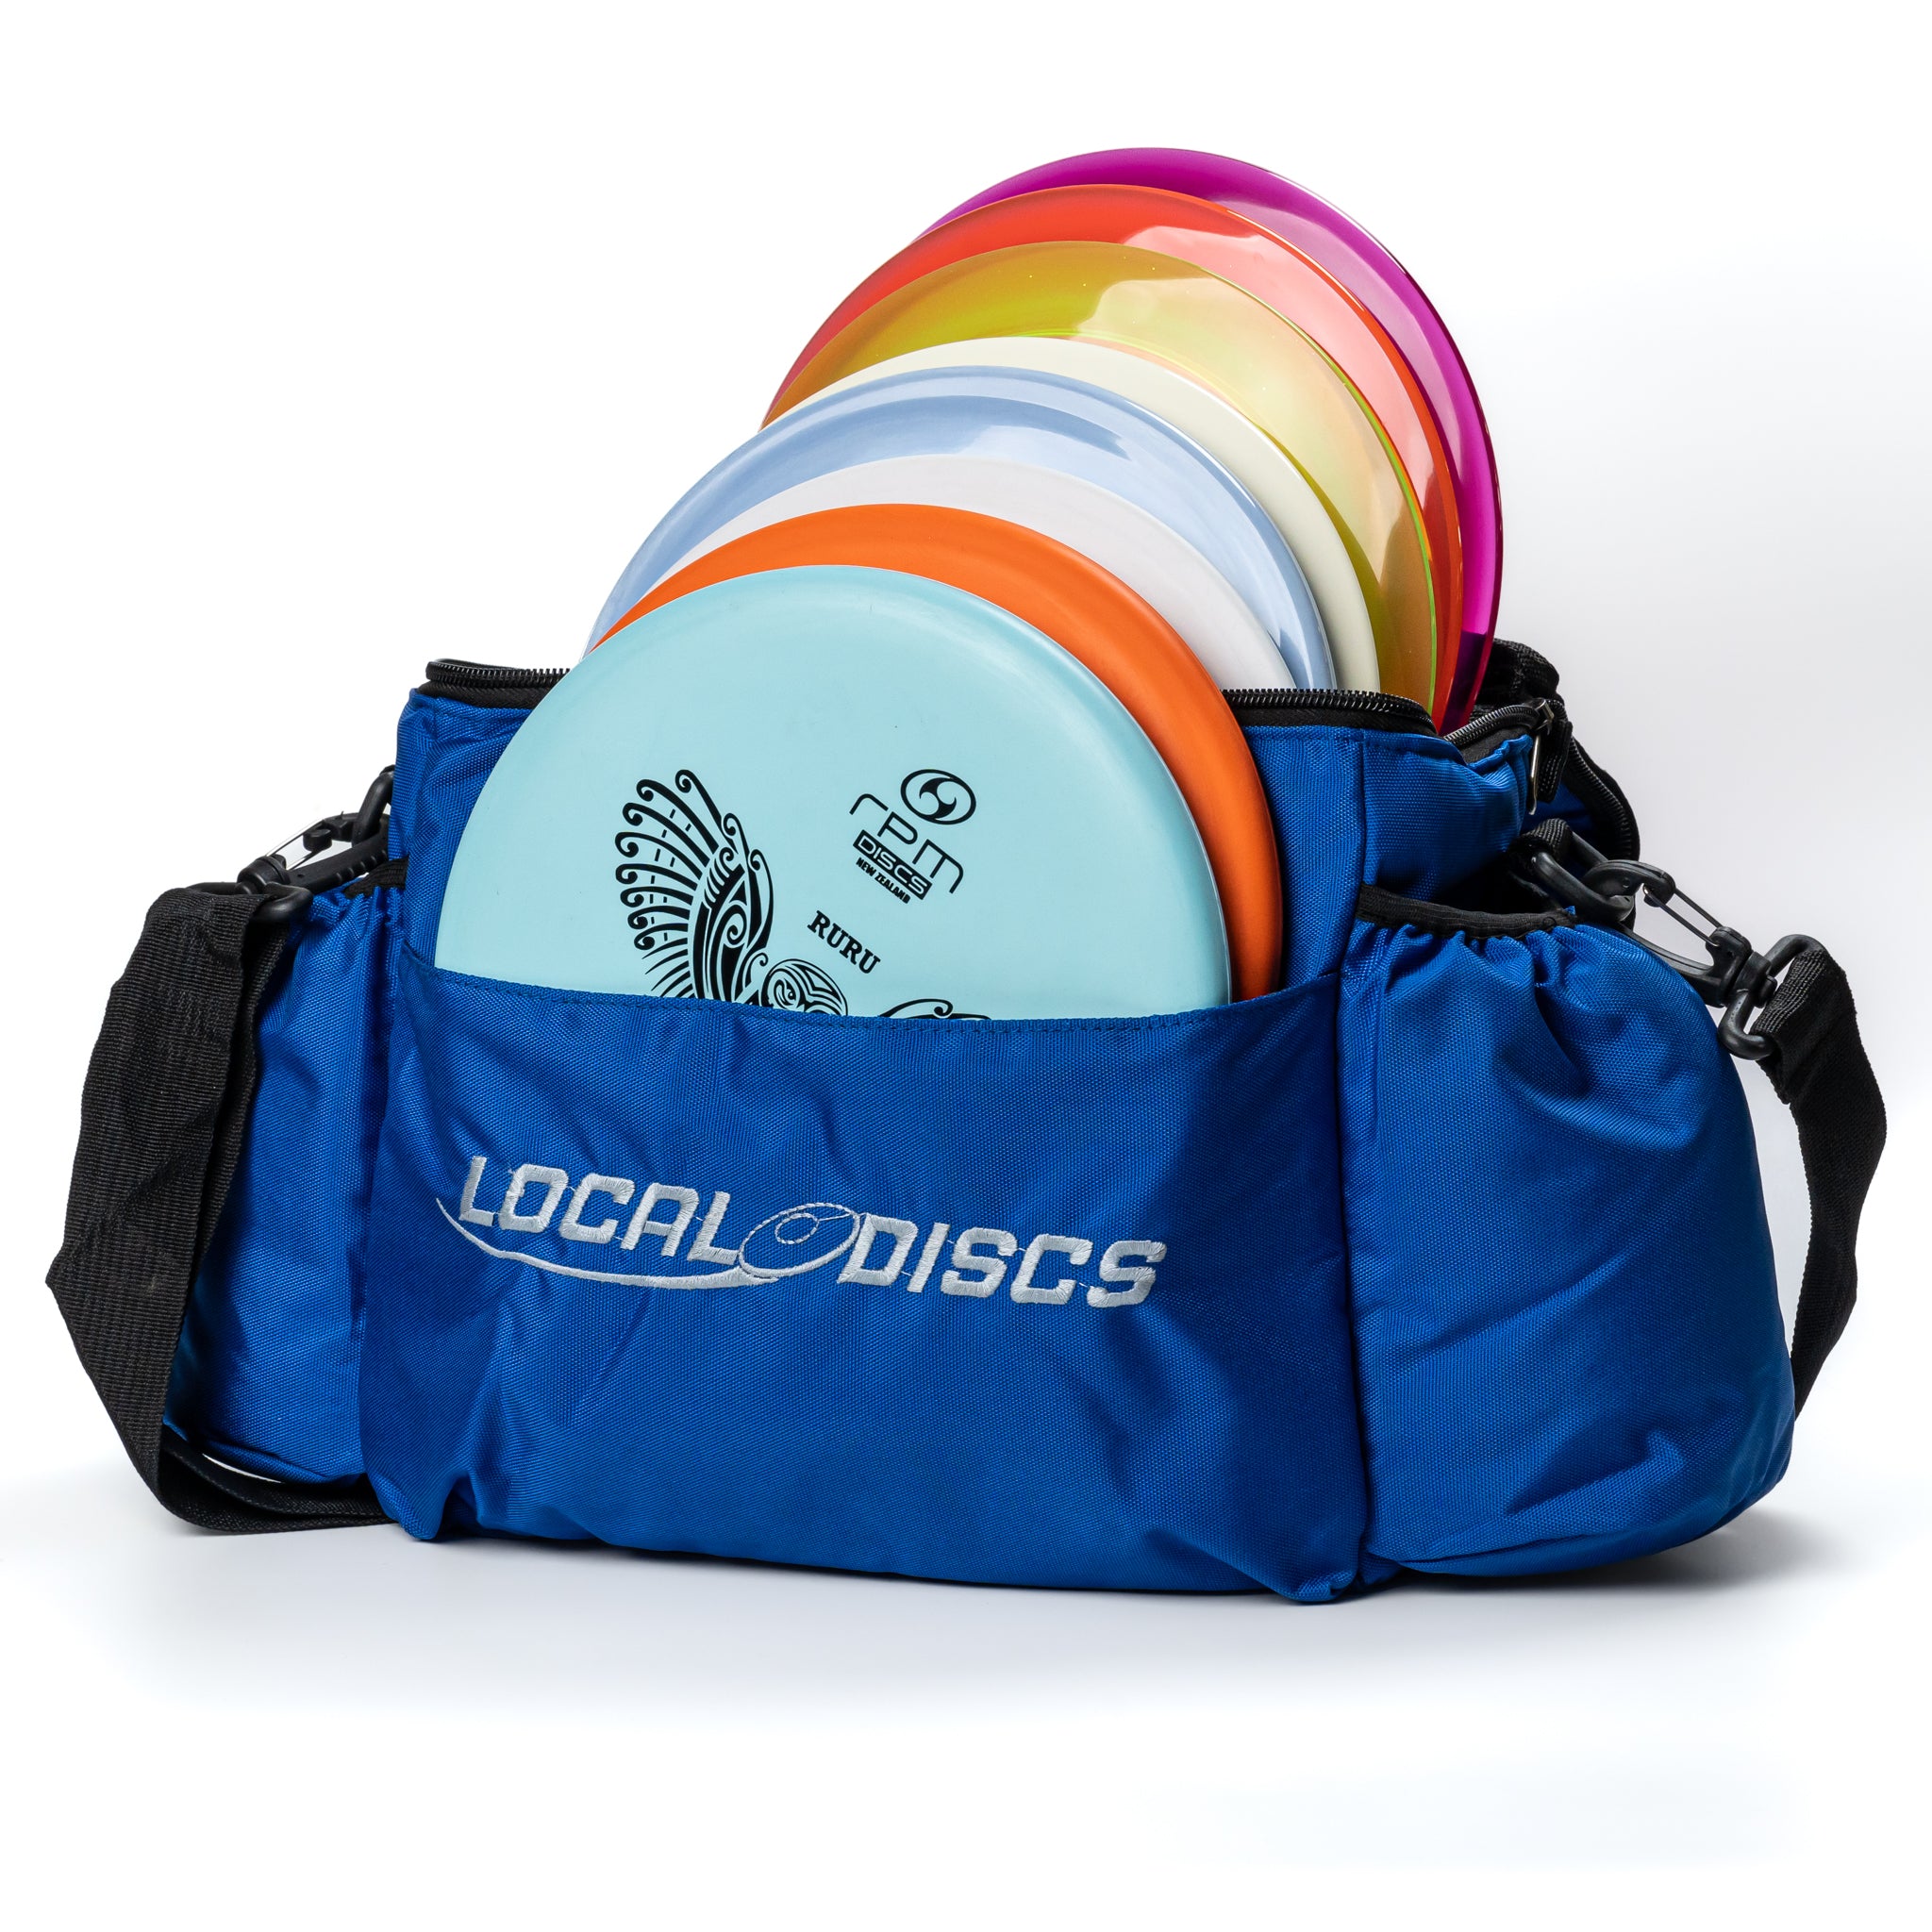 Local Discs Pro Deluxe Disc Golf Set with blue bag and Ruru putter